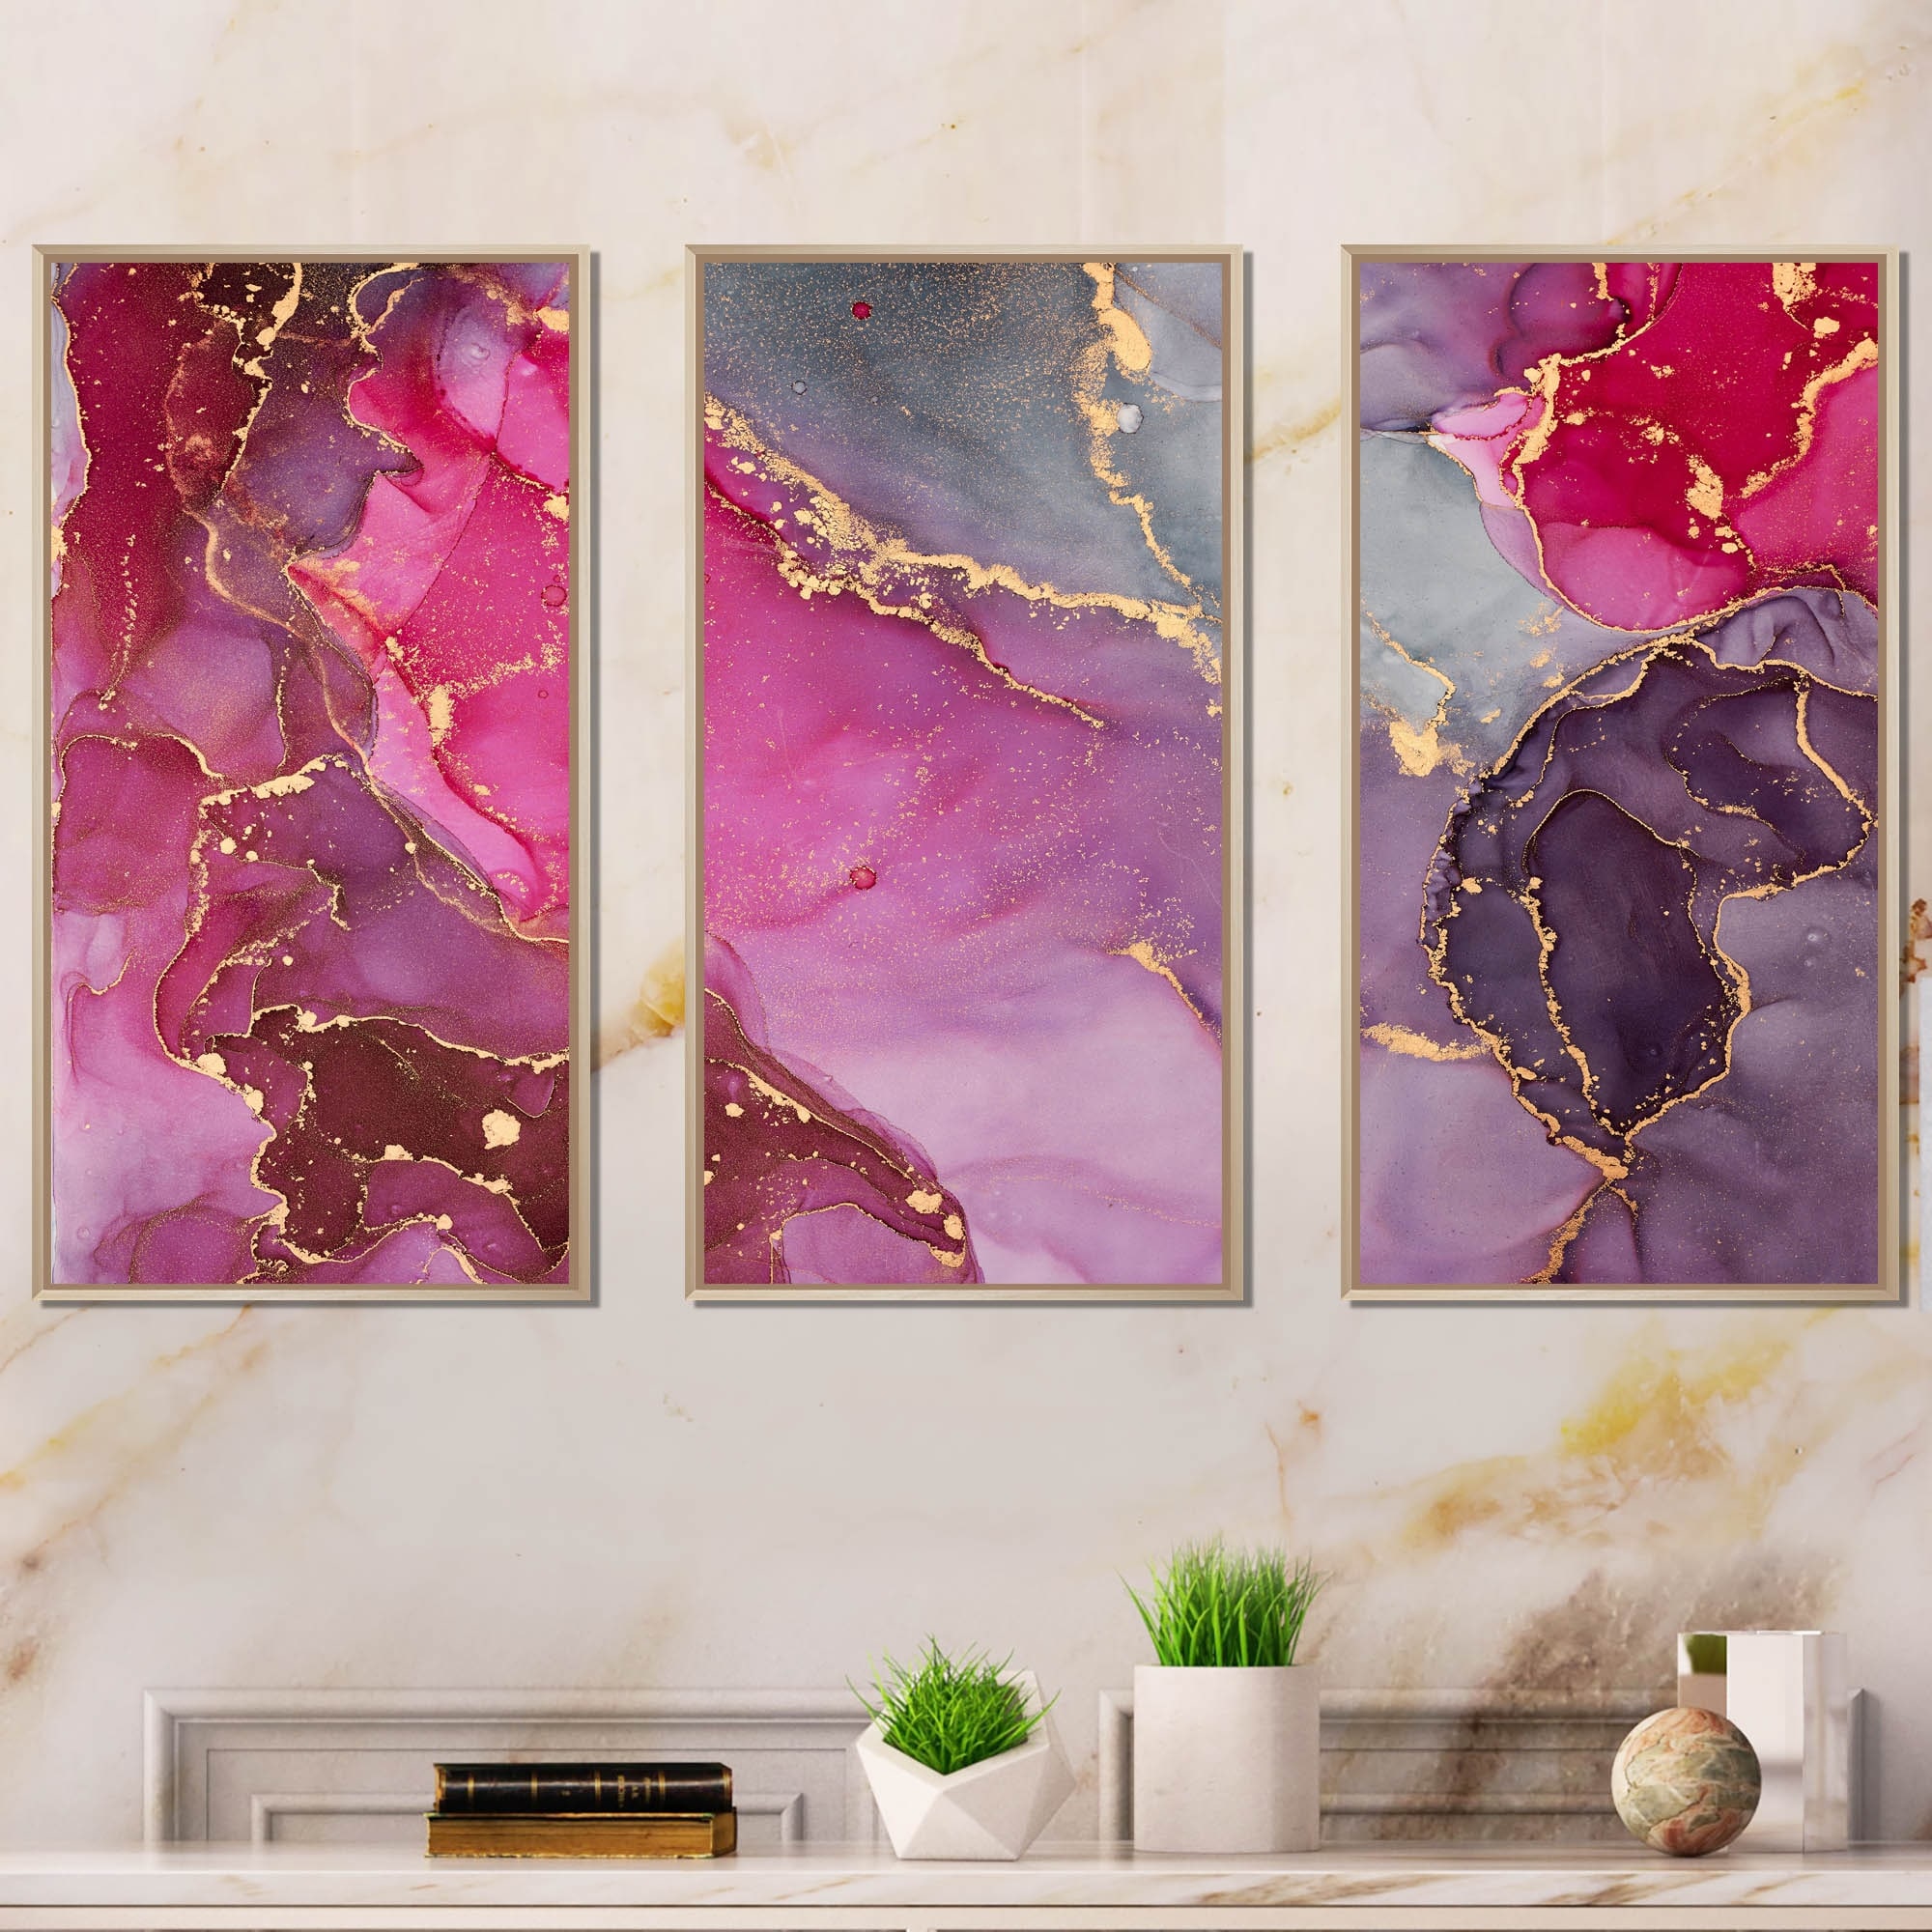 https://ak1.ostkcdn.com/images/products/is/images/direct/f335c52208acf9e4711af1af5e7a38a678d09a56/Designart-%22Pink-And-Black-Luxury-Abstract-Fluid-Art-III%22-Modern-Framed-Canvas-Wall-Art-Set-of-3---4-Colors-of-Frames.jpg